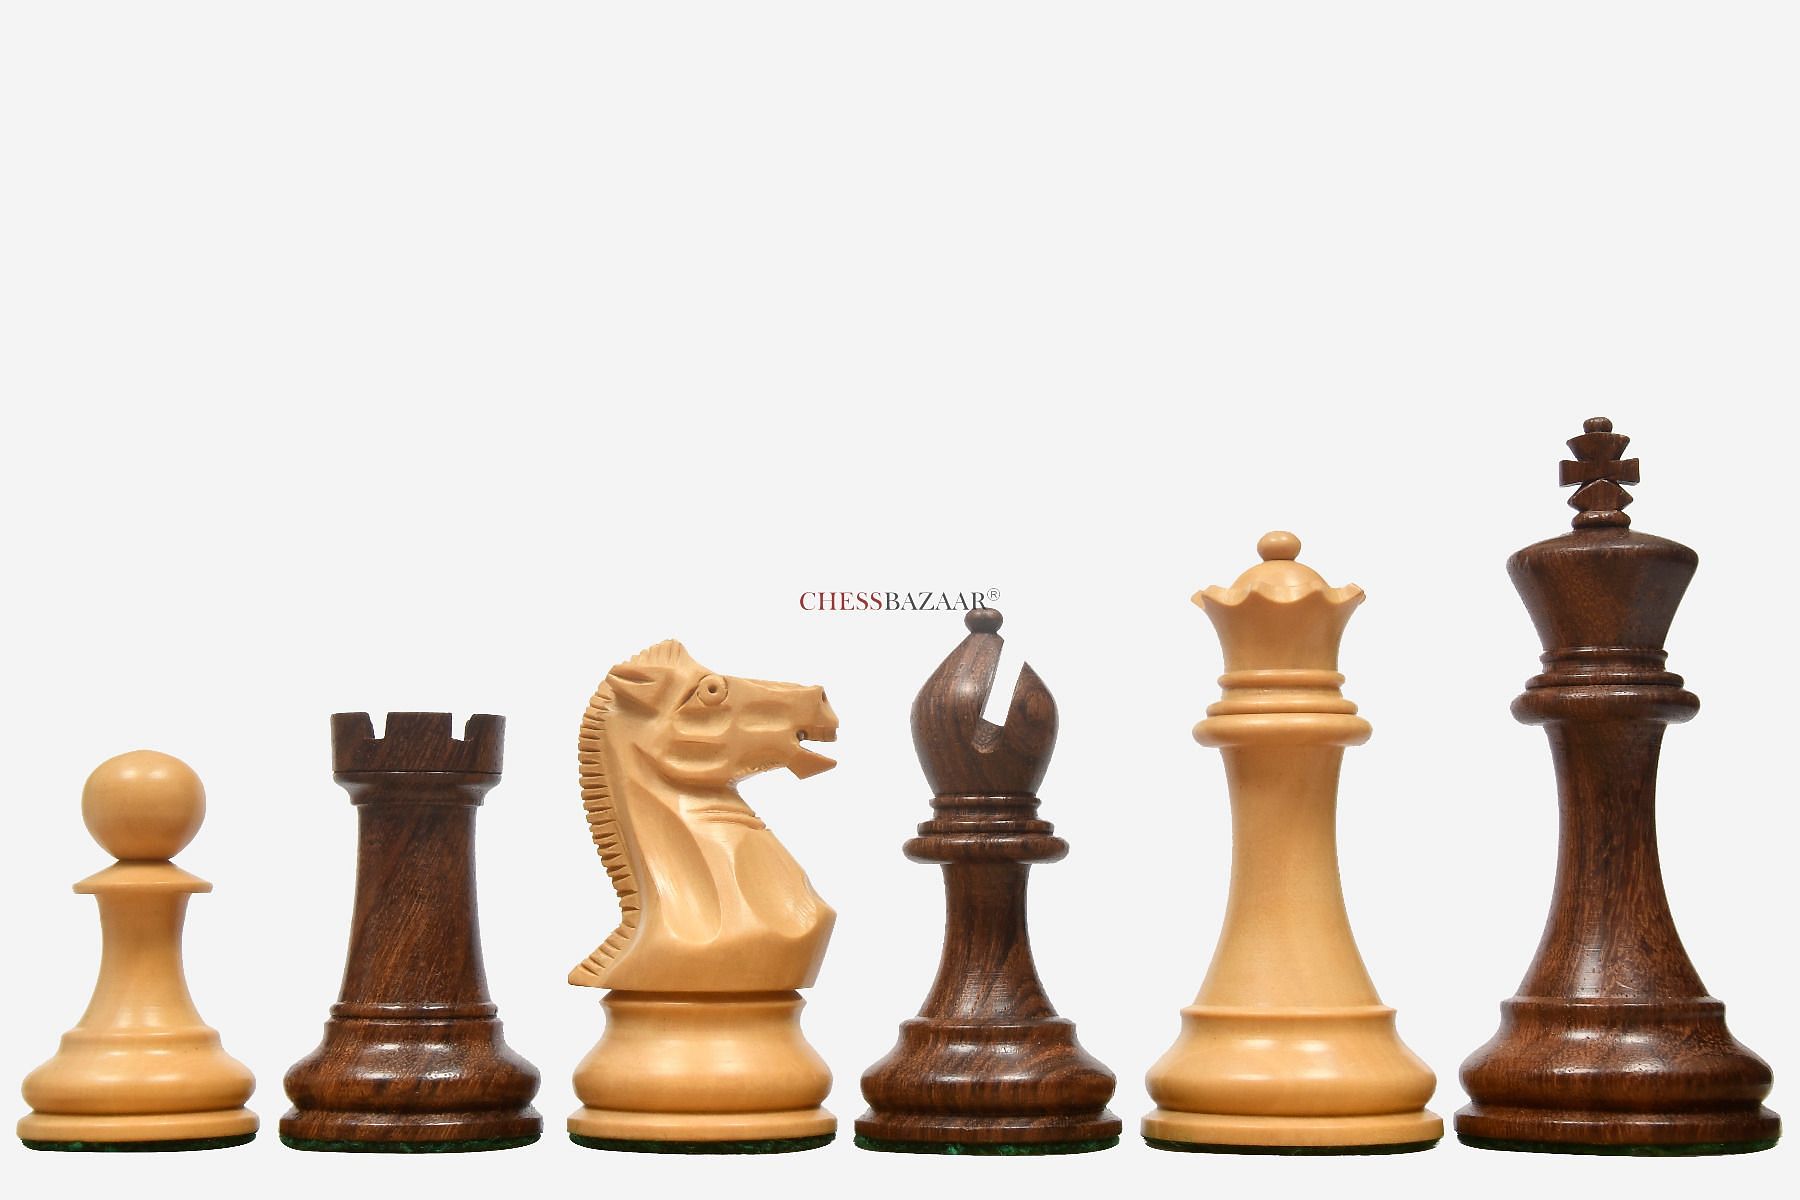 Professional Chess Pieces for Sale - Buy Professional Tournament Chess